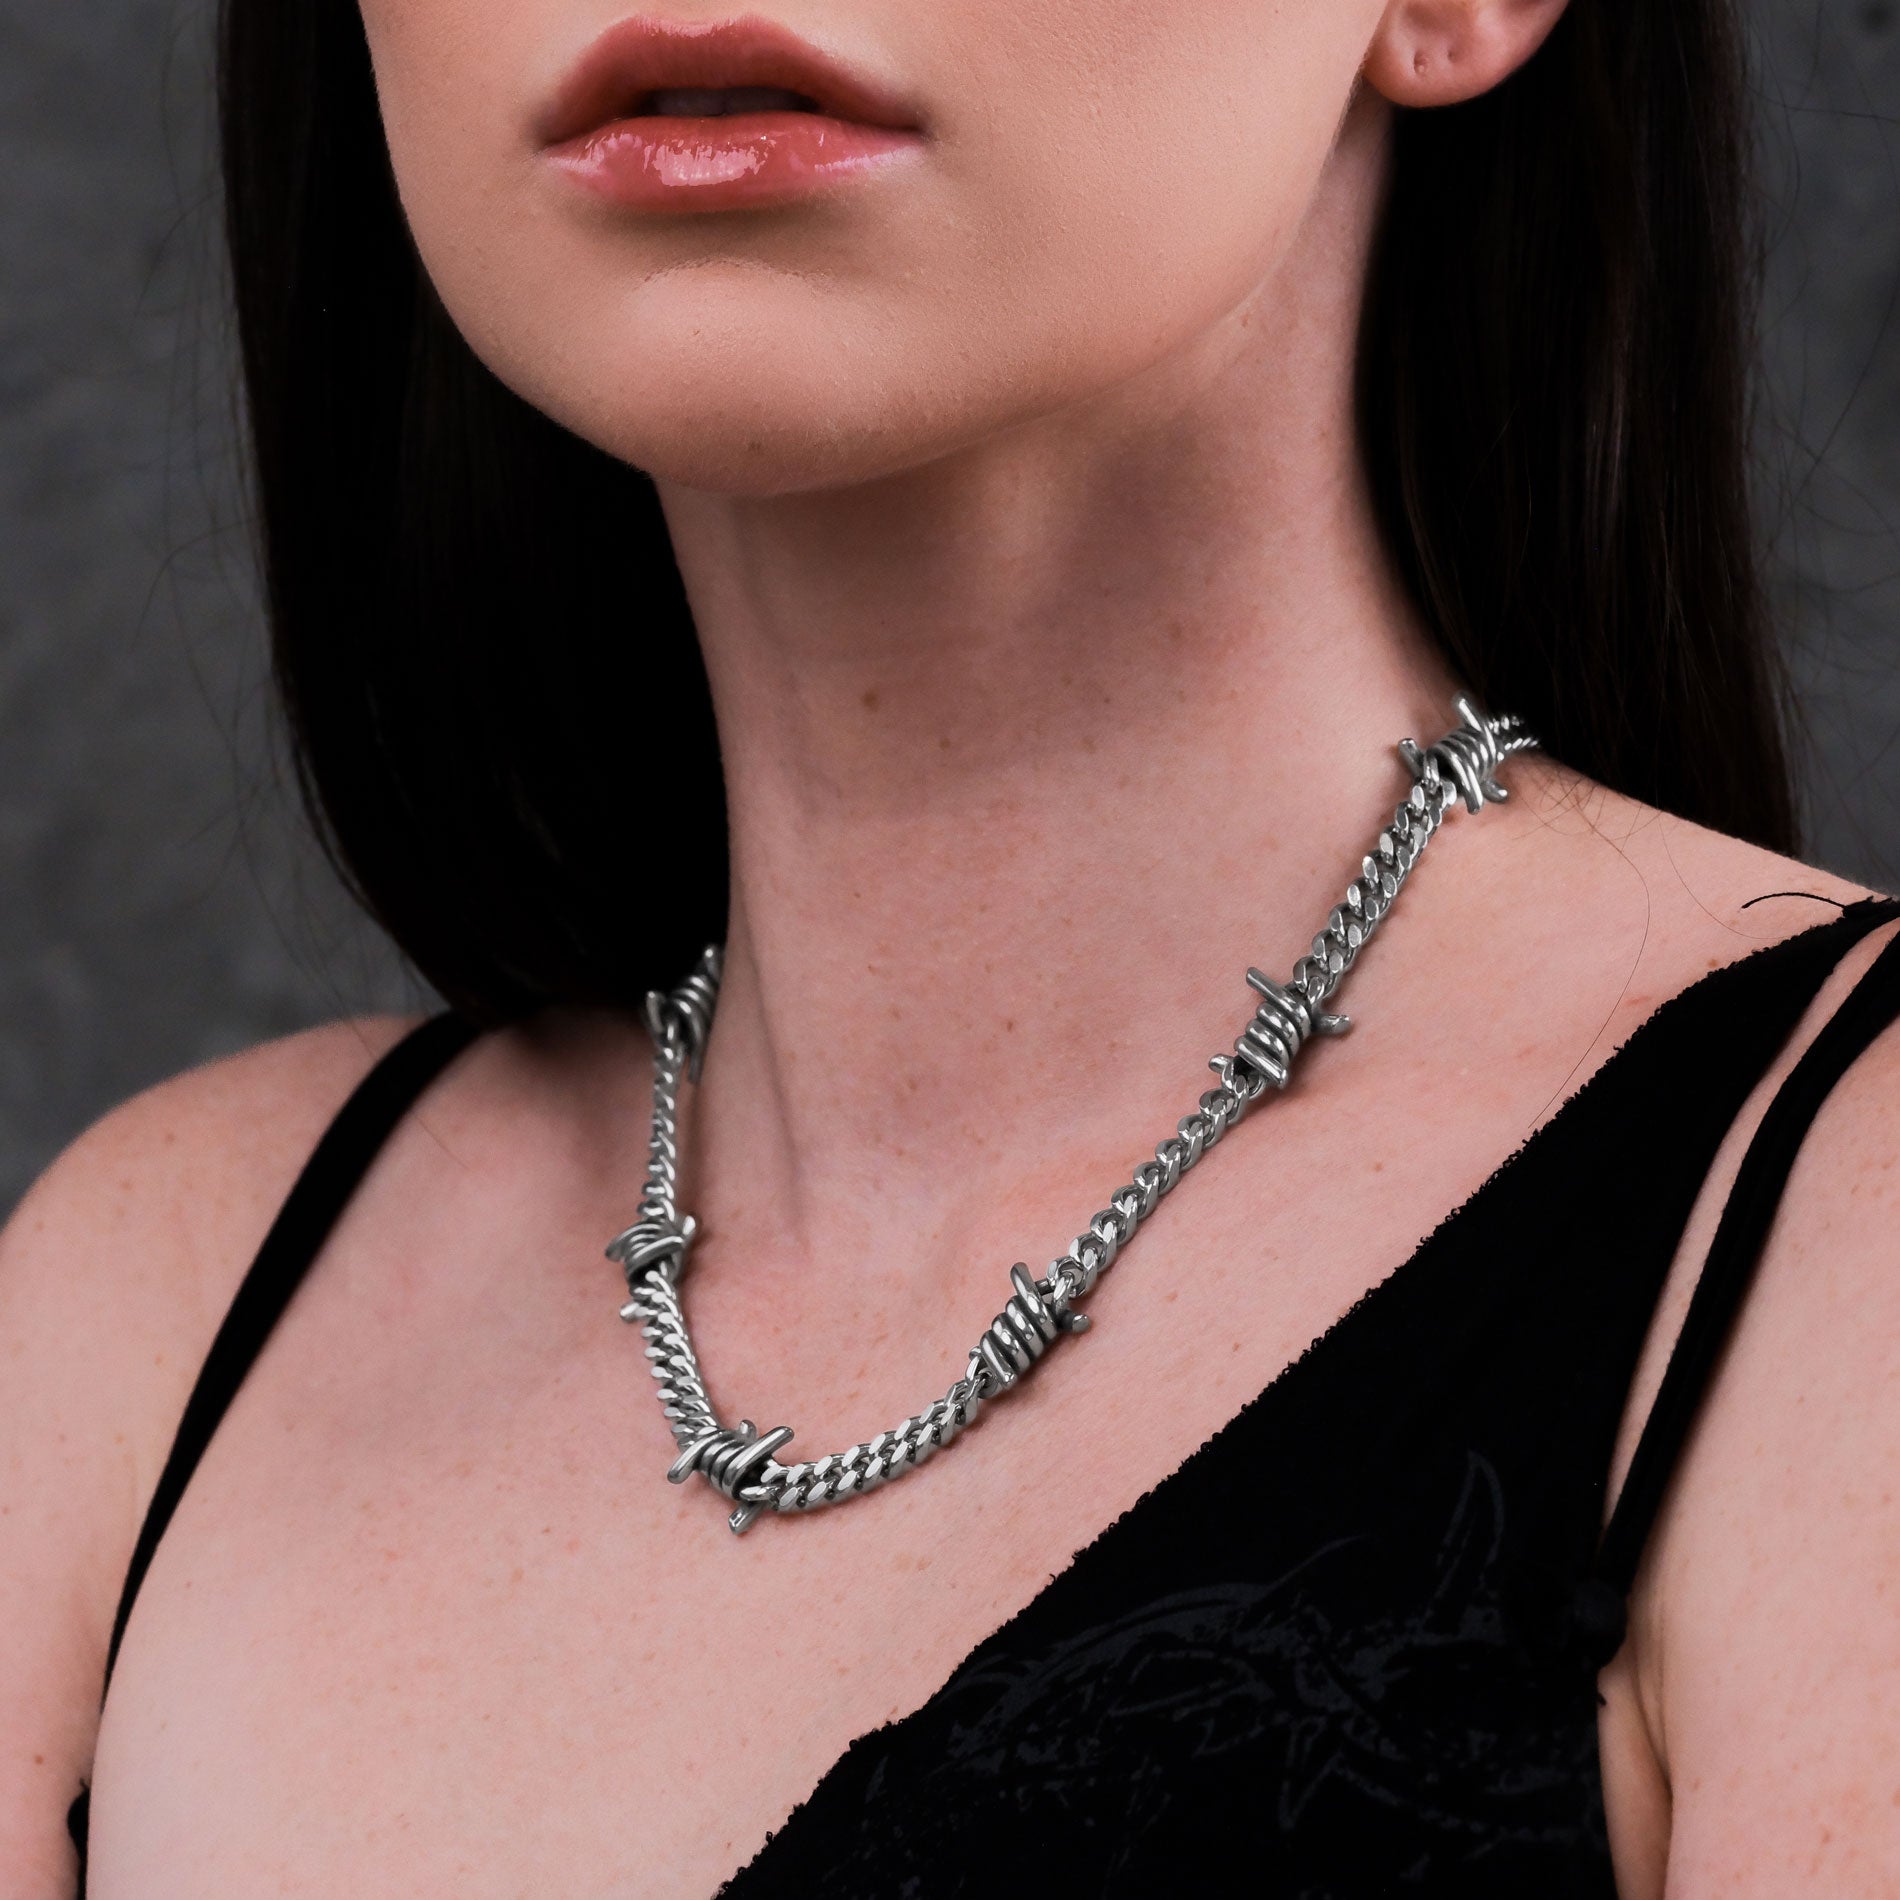 Grunge silver necklace with cuban links